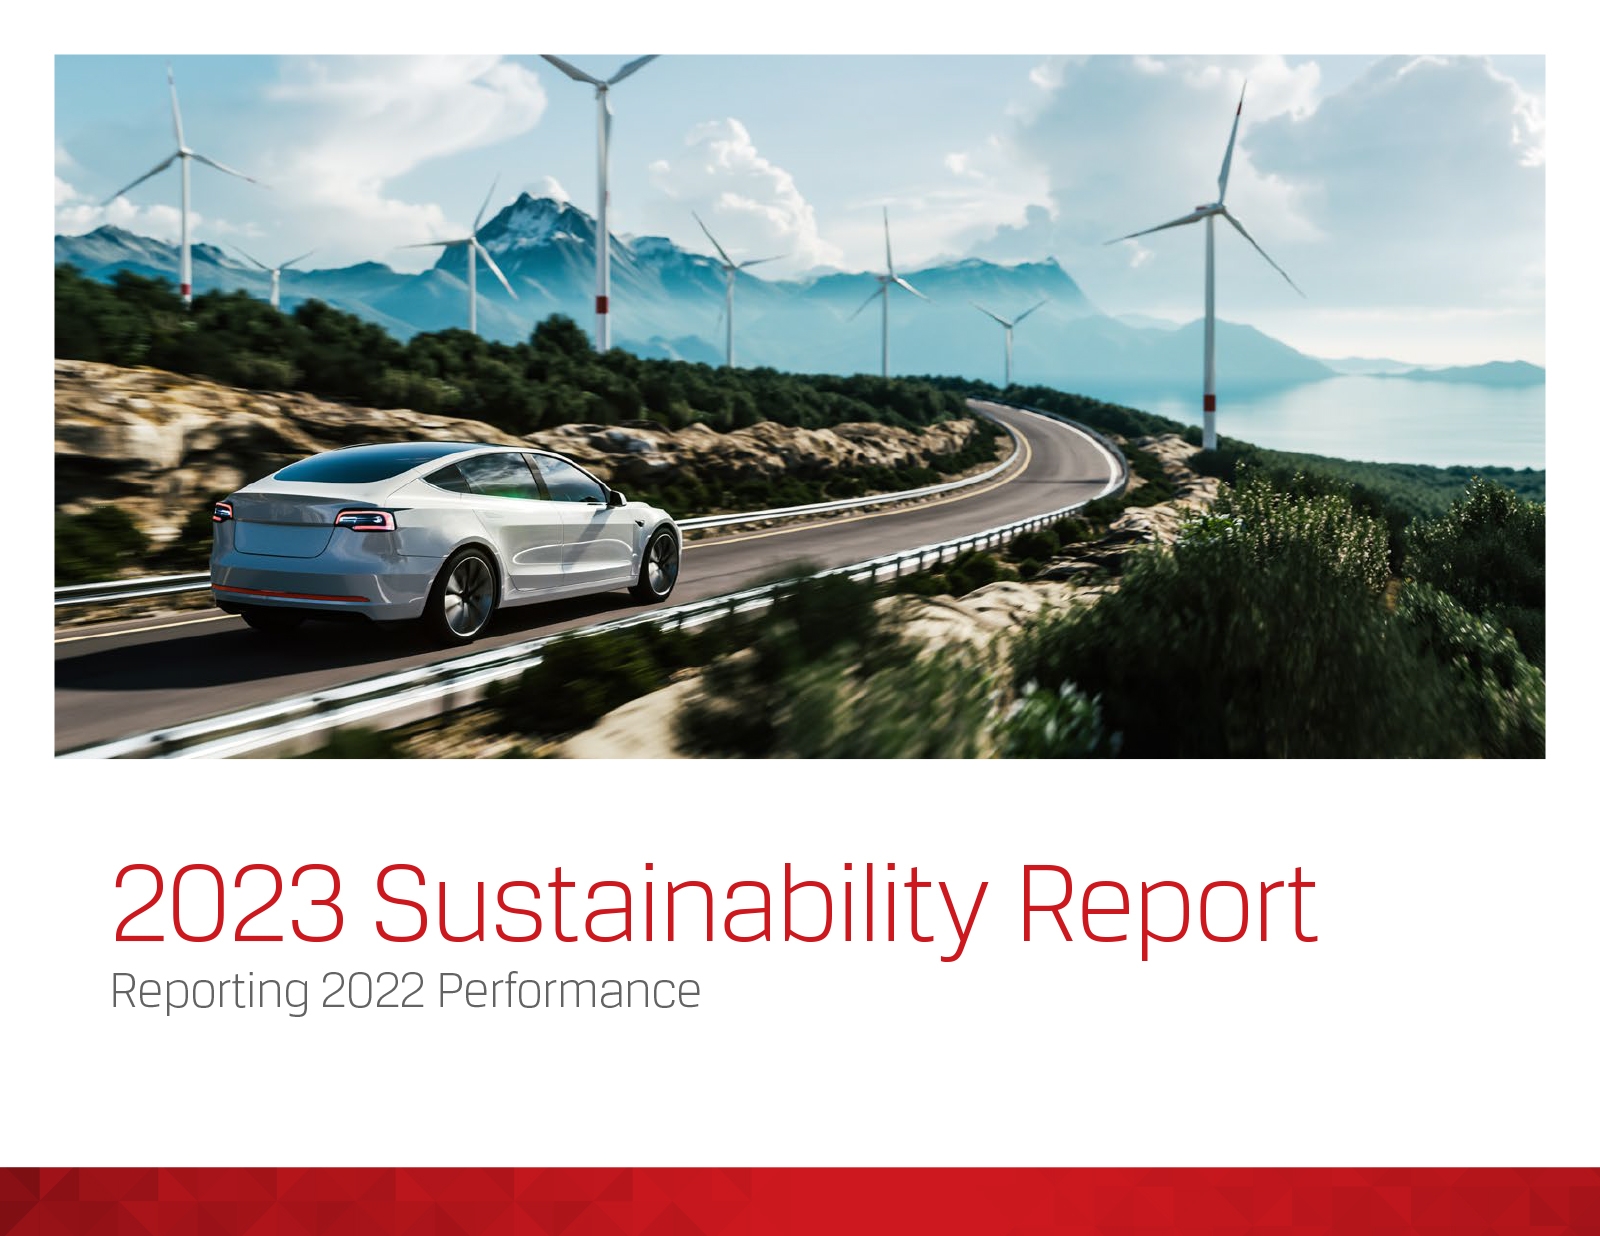 2023 Sustainability Report - Cover